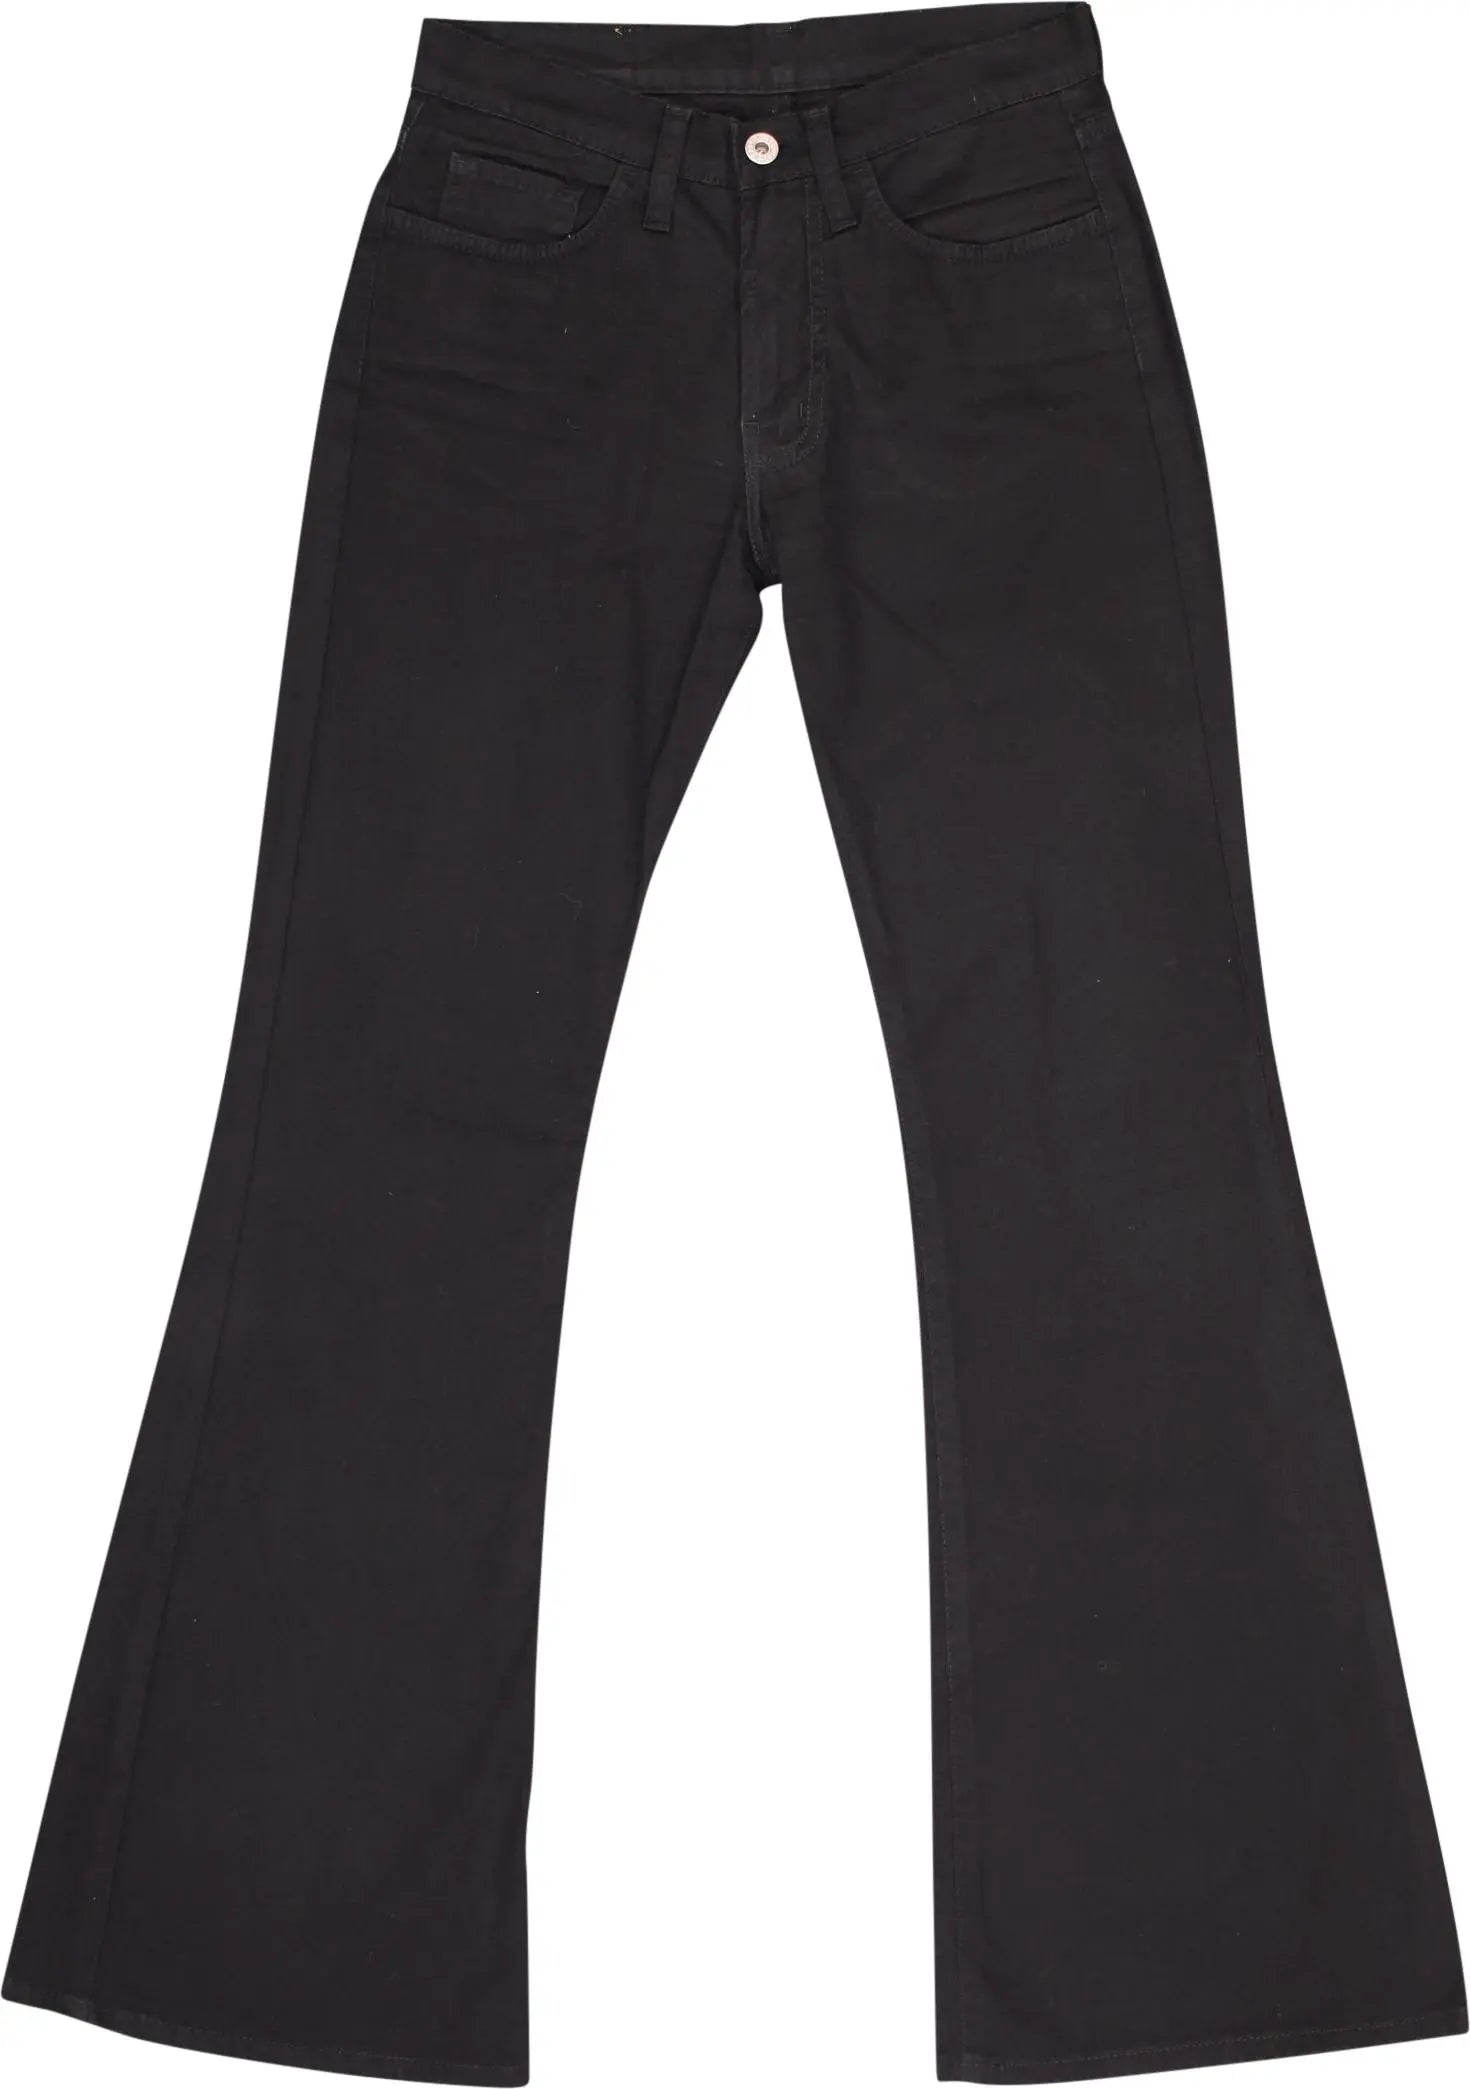 Replay - Black Flared Jeans by Replay- ThriftTale.com - Vintage and second handclothing